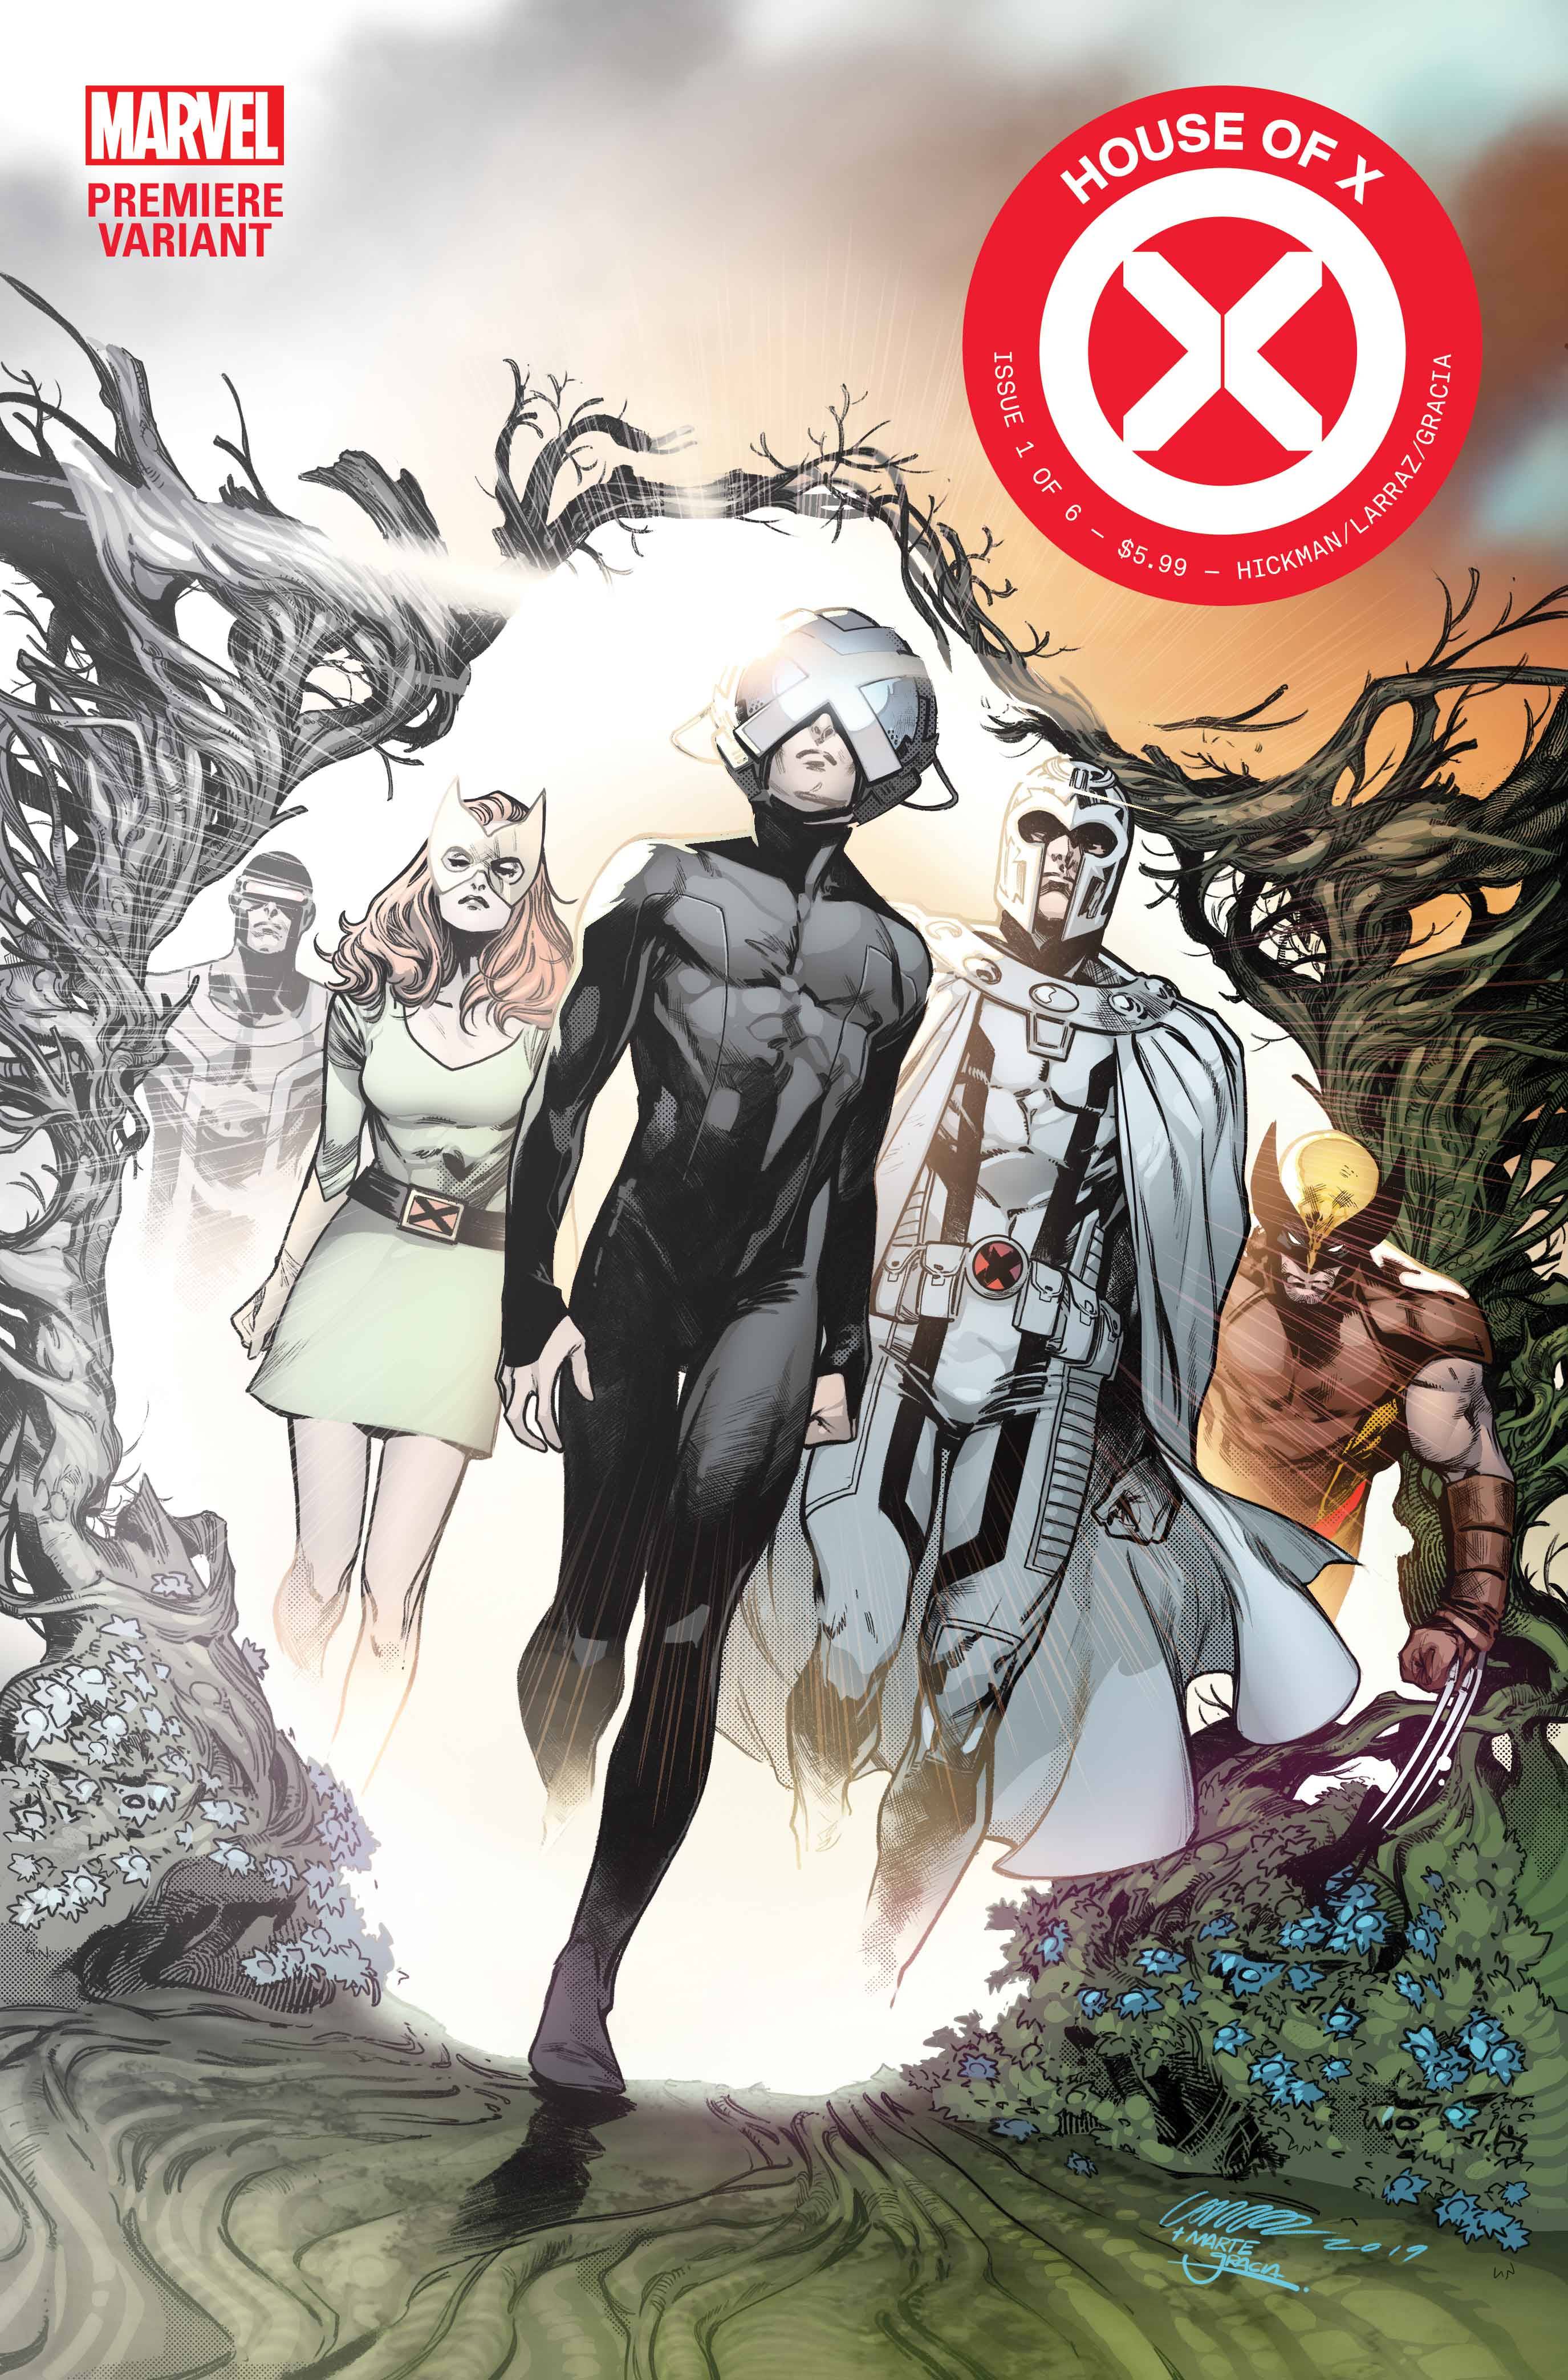 House of X #1 Larraz Premiere Variant (Of 6)